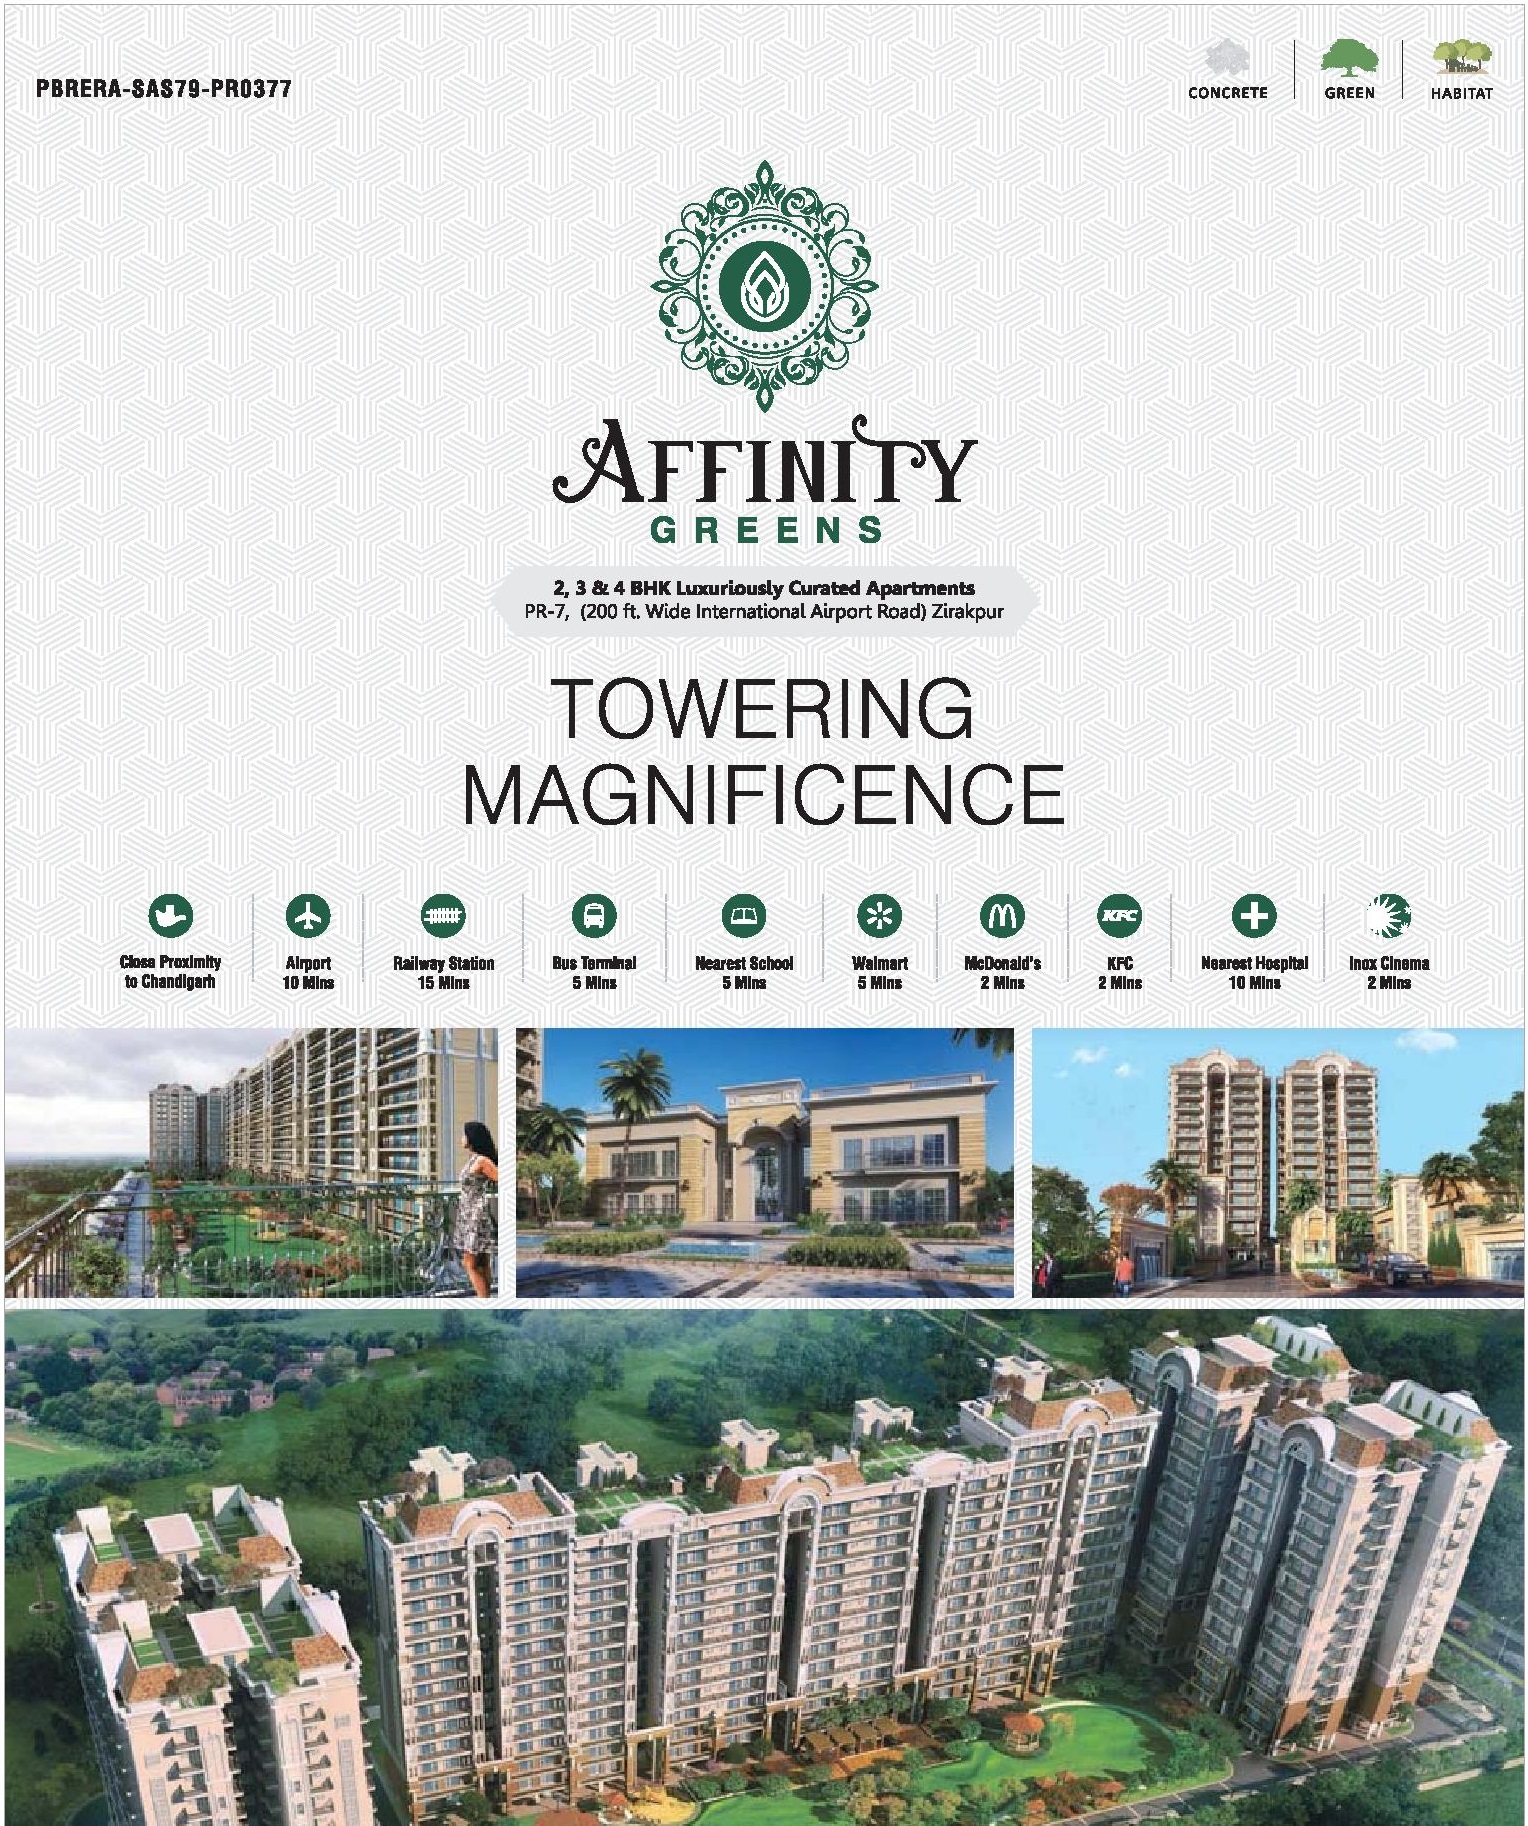 Book 2, 3 & 4 luxurious curated apartments at Affinity Greens in Zirakpur Update